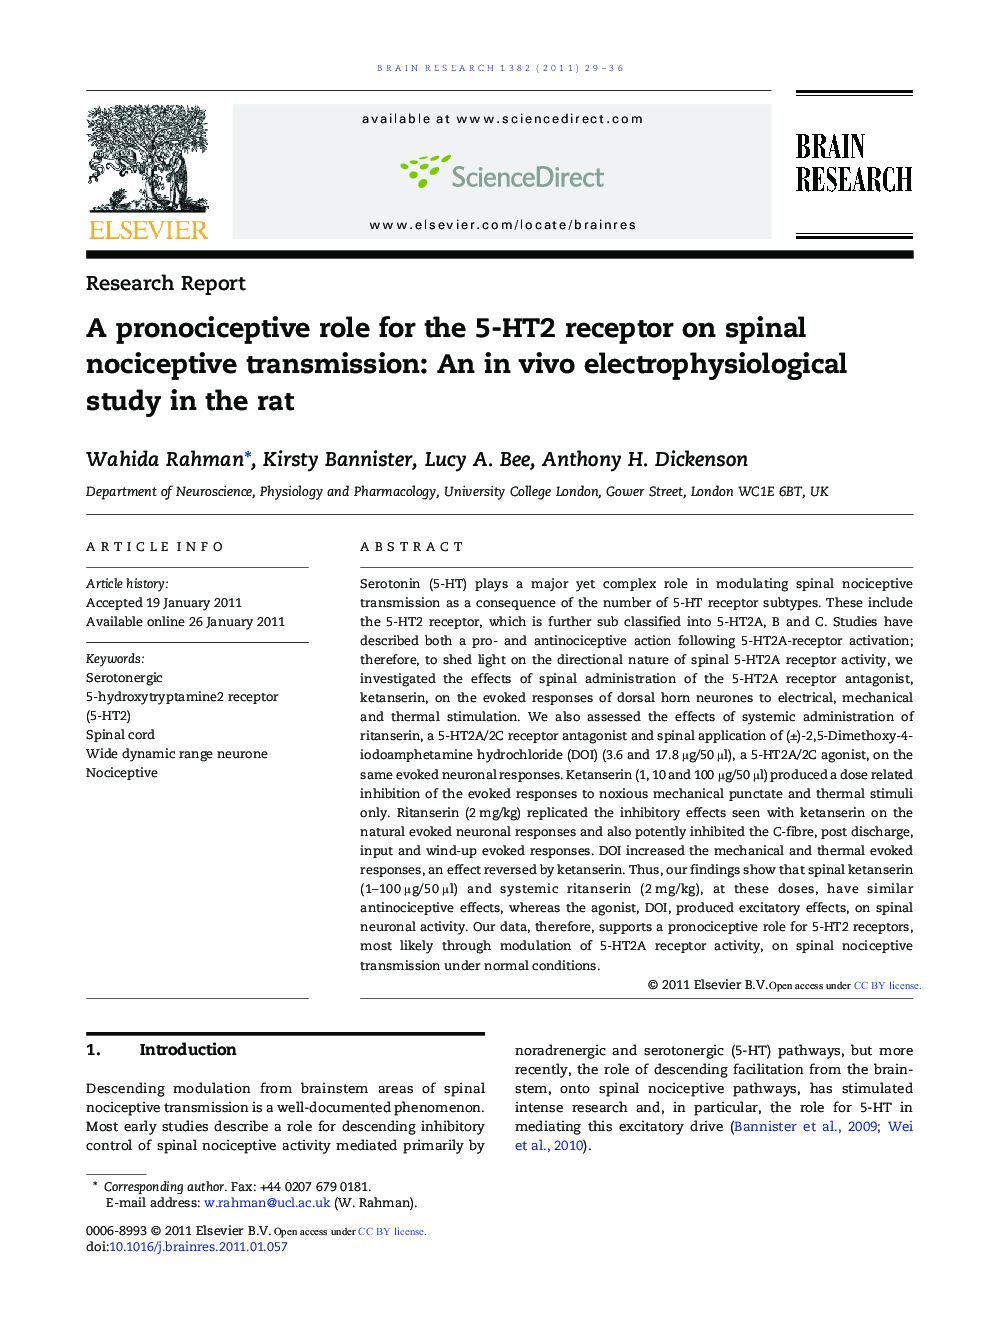 Research ReportA pronociceptive role for the 5-HT2 receptor on spinal nociceptive transmission: An in vivo electrophysiological study in the rat